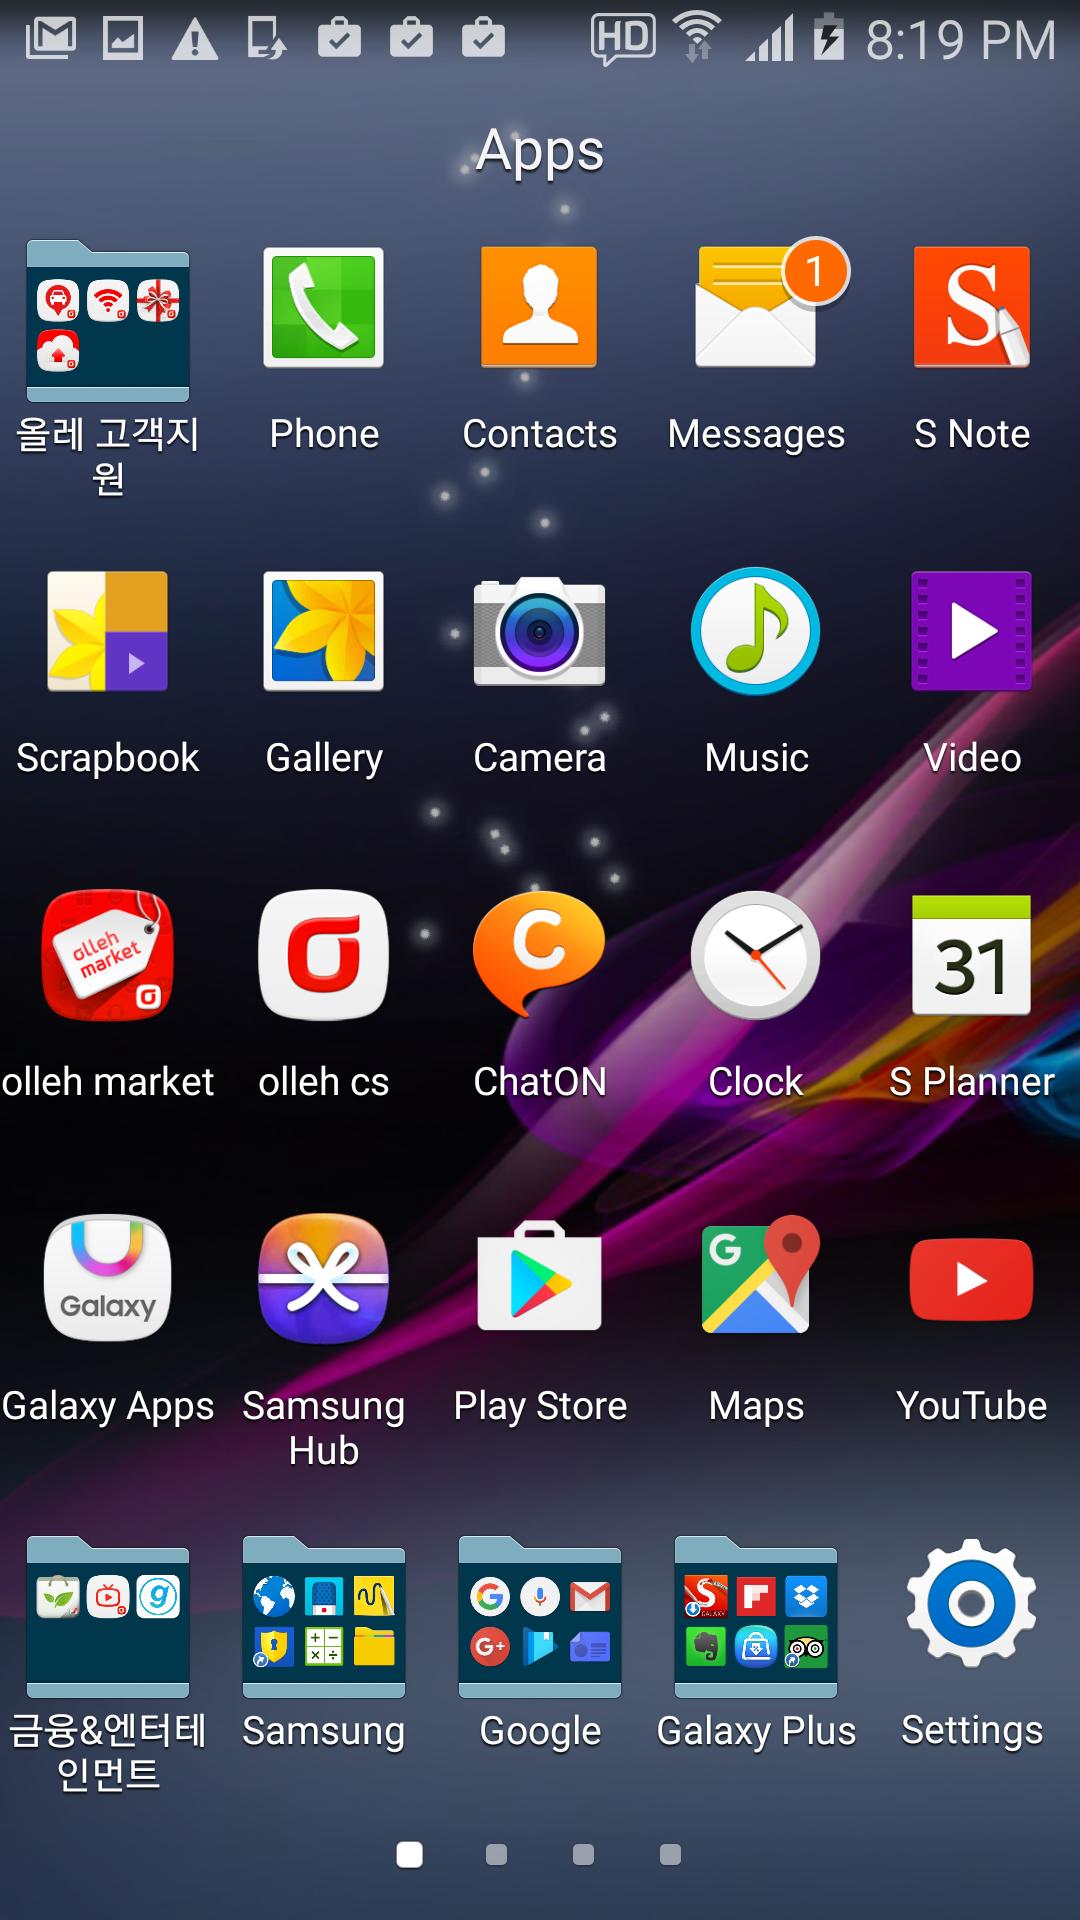 Android 用の Wallpaper Xperia Z Wave Apk をダウンロード